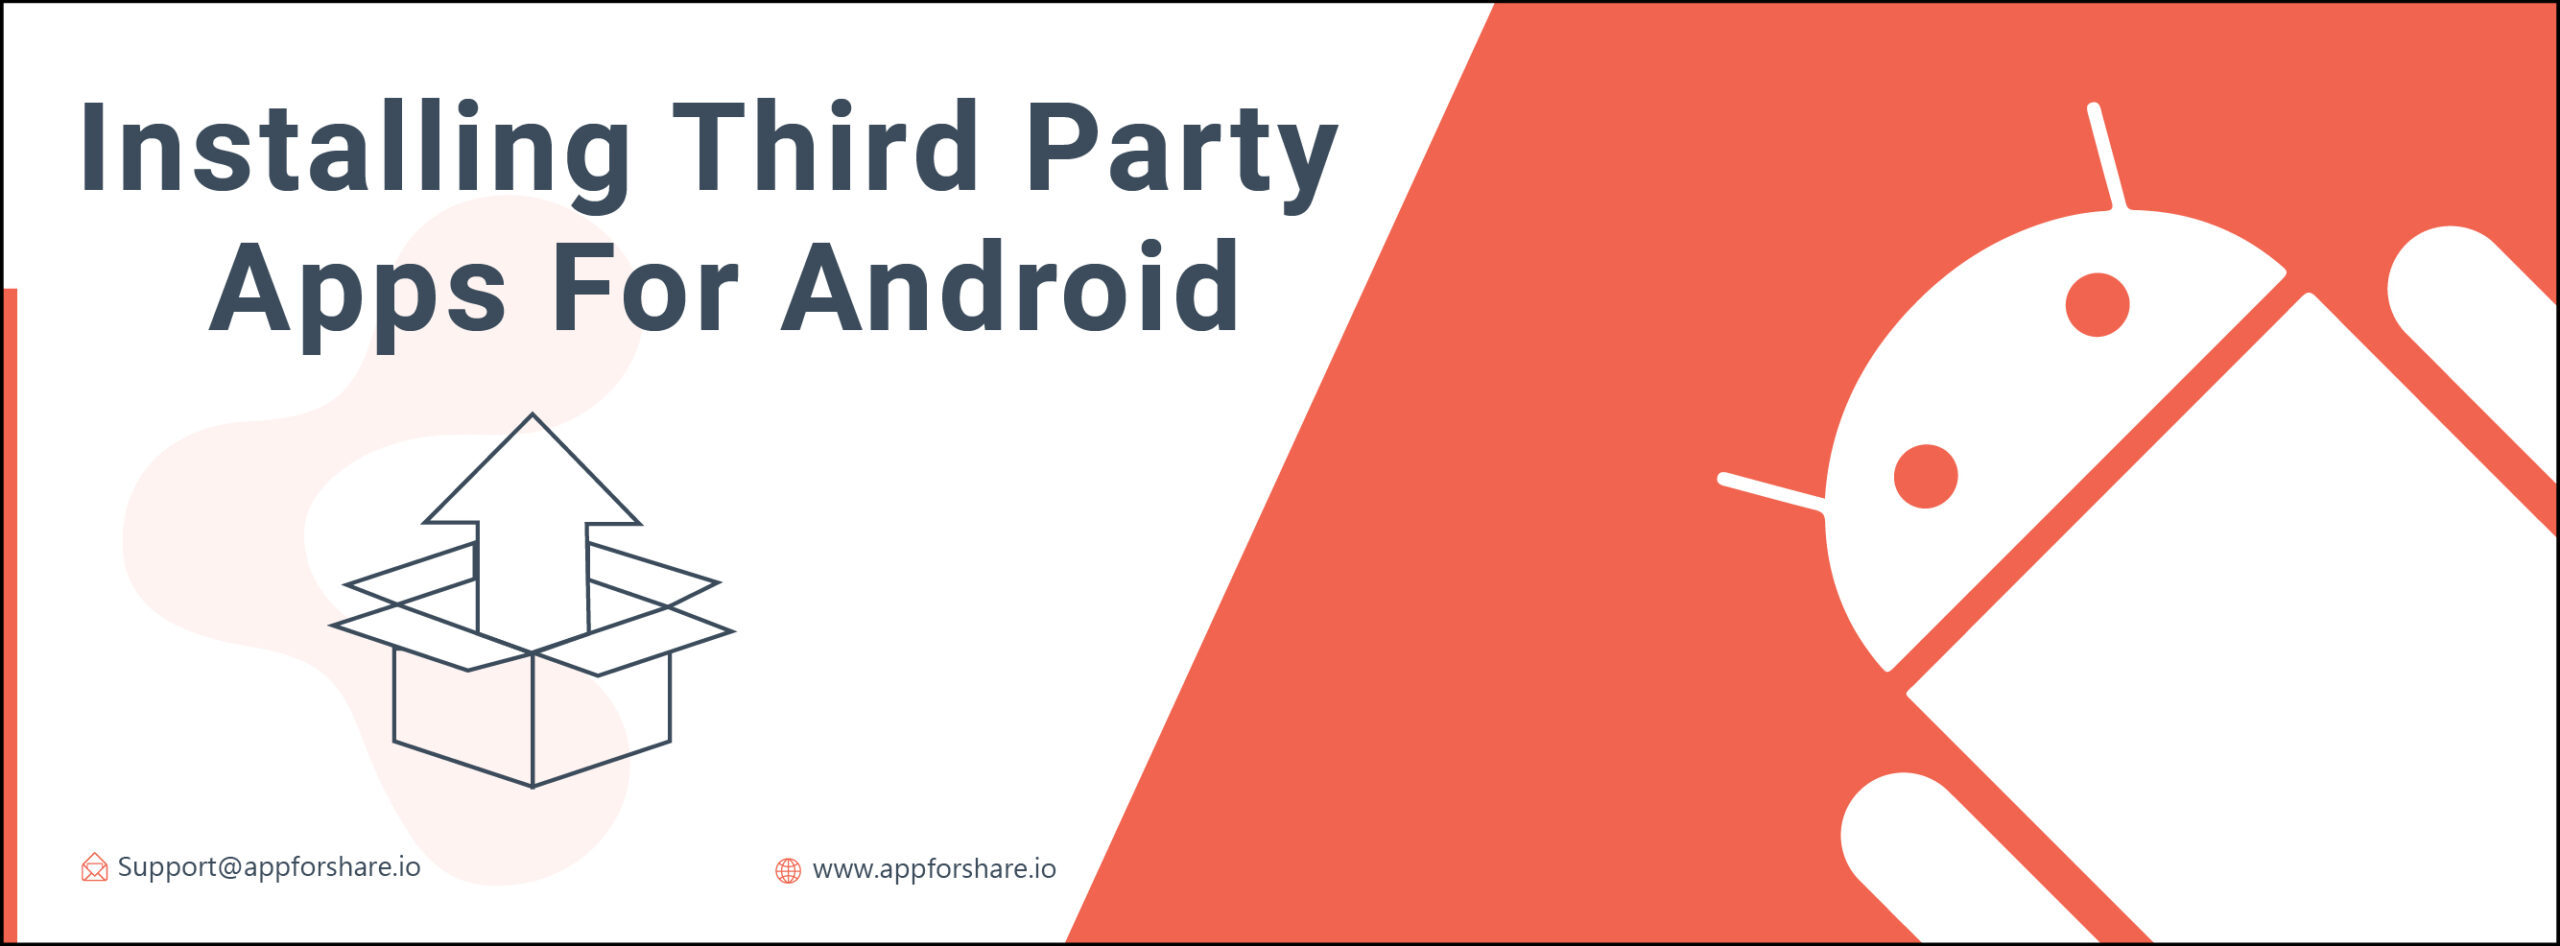 You are currently viewing Installing Third Party Apps for Android